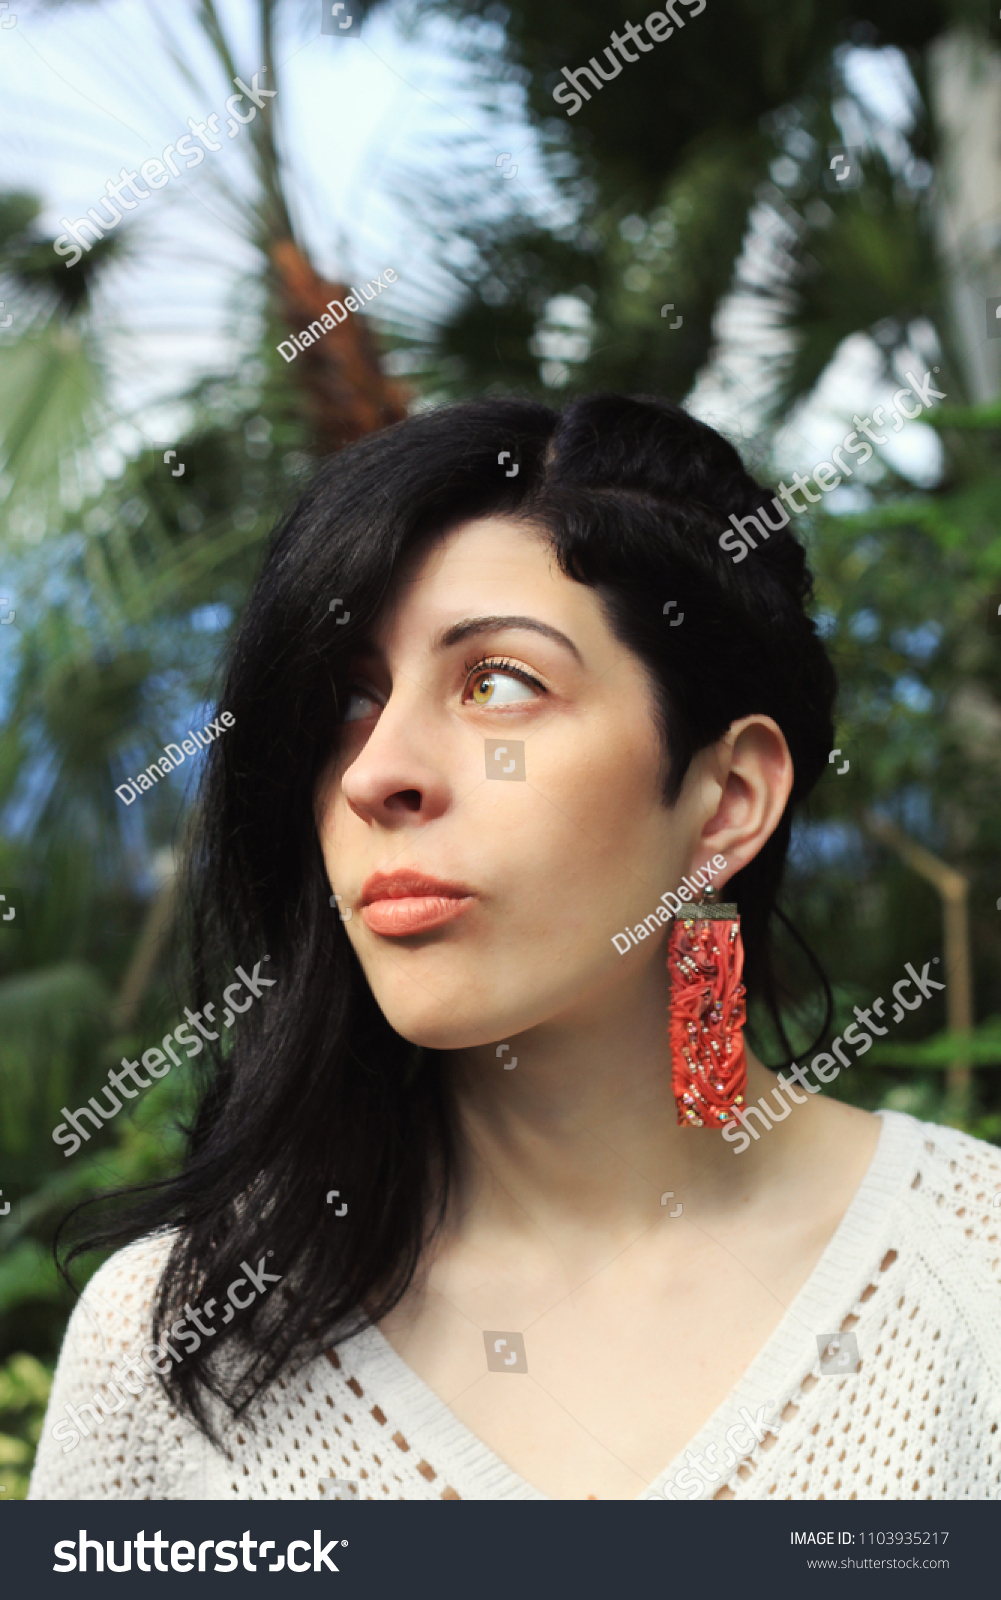 Chic Looking Woman Black Hair Shaved Stock Image Download Now